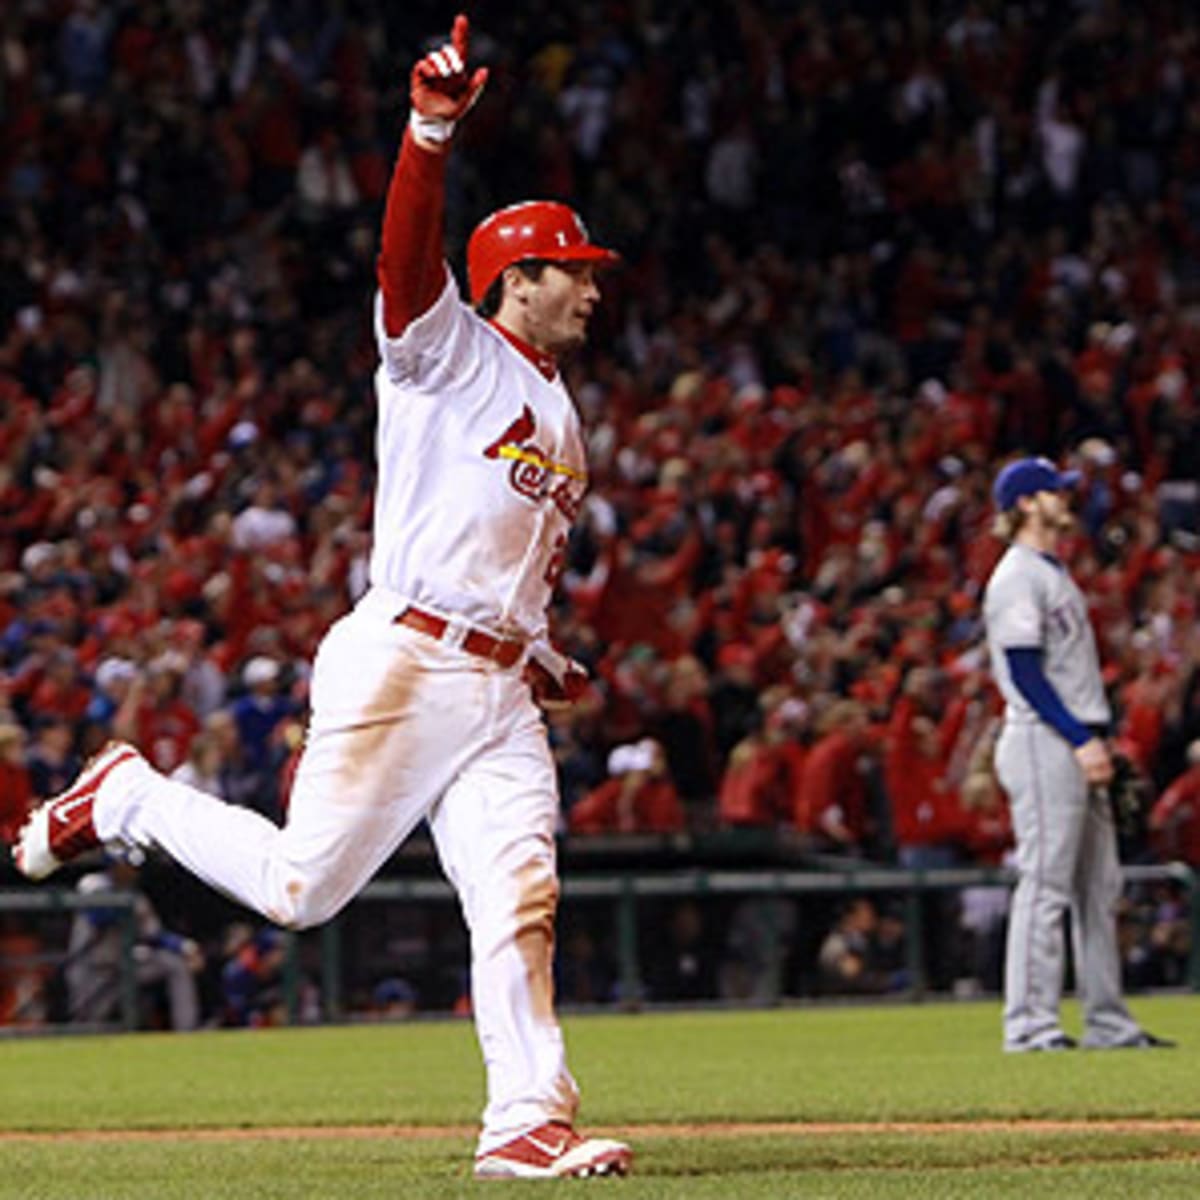 David Freese avoids arbitration with Cardinals - Sports Illustrated